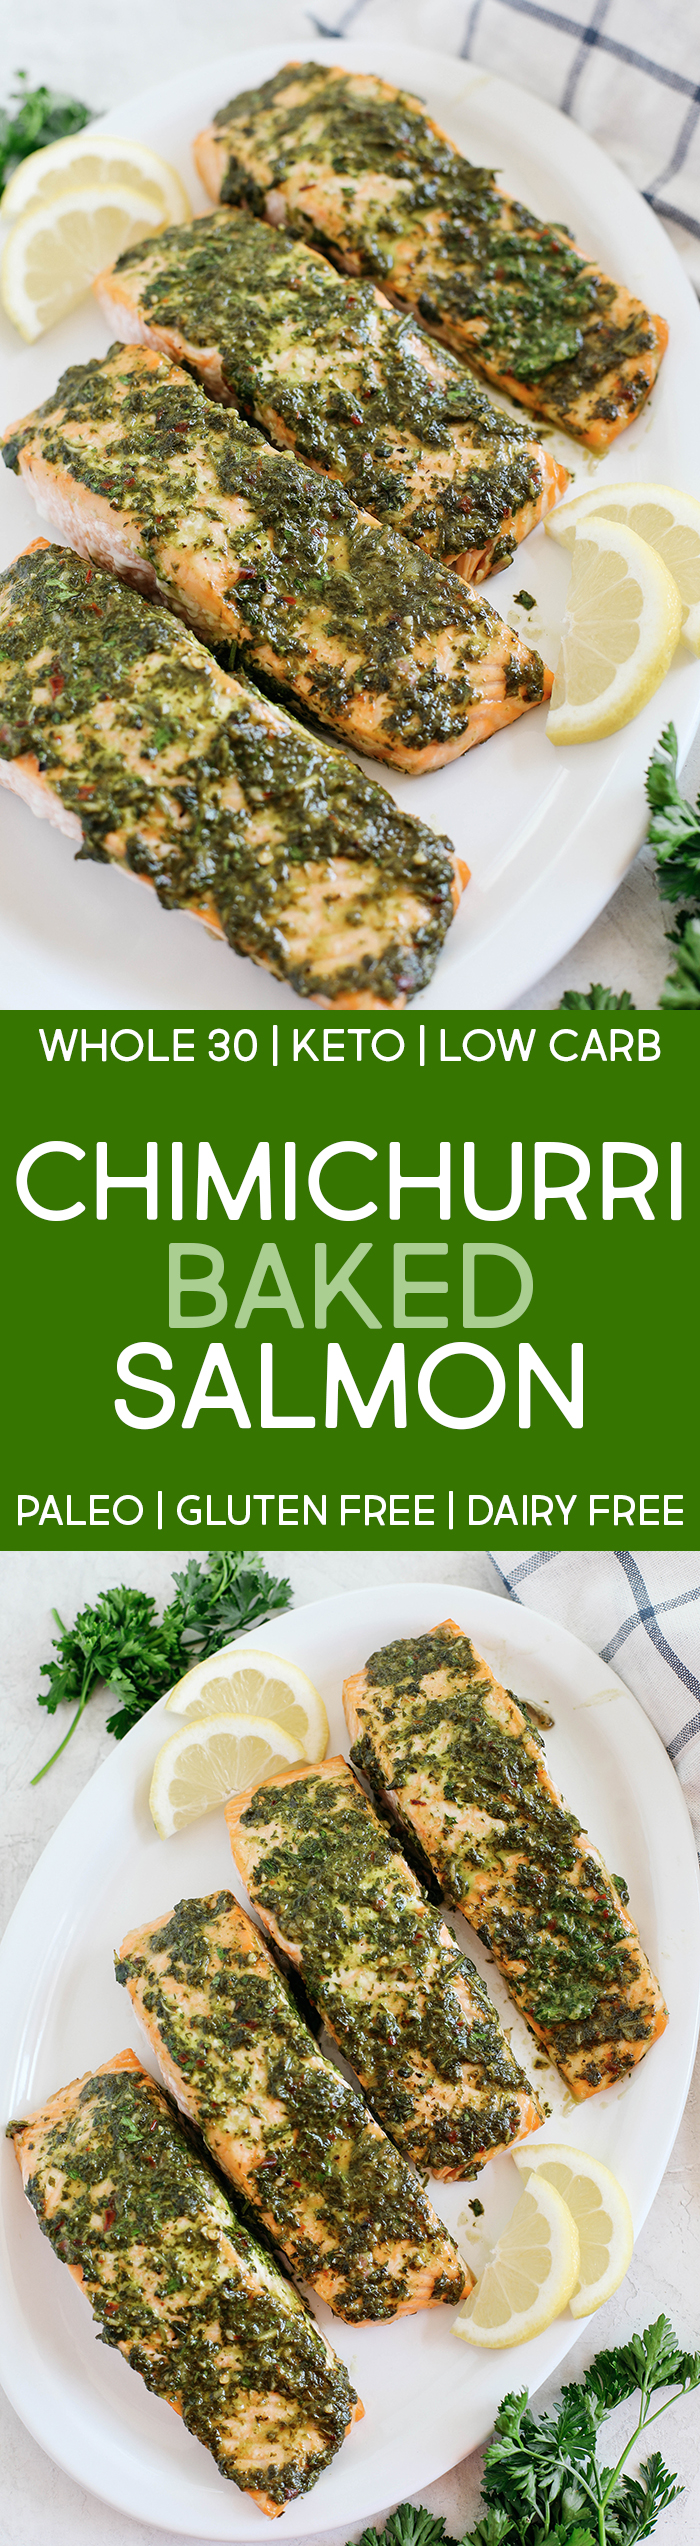 This deliciously EASY Chimichurri Baked Salmon makes the perfect weeknight dinner that’s healthy, easy to prepare, and ready in under 20 minutes!